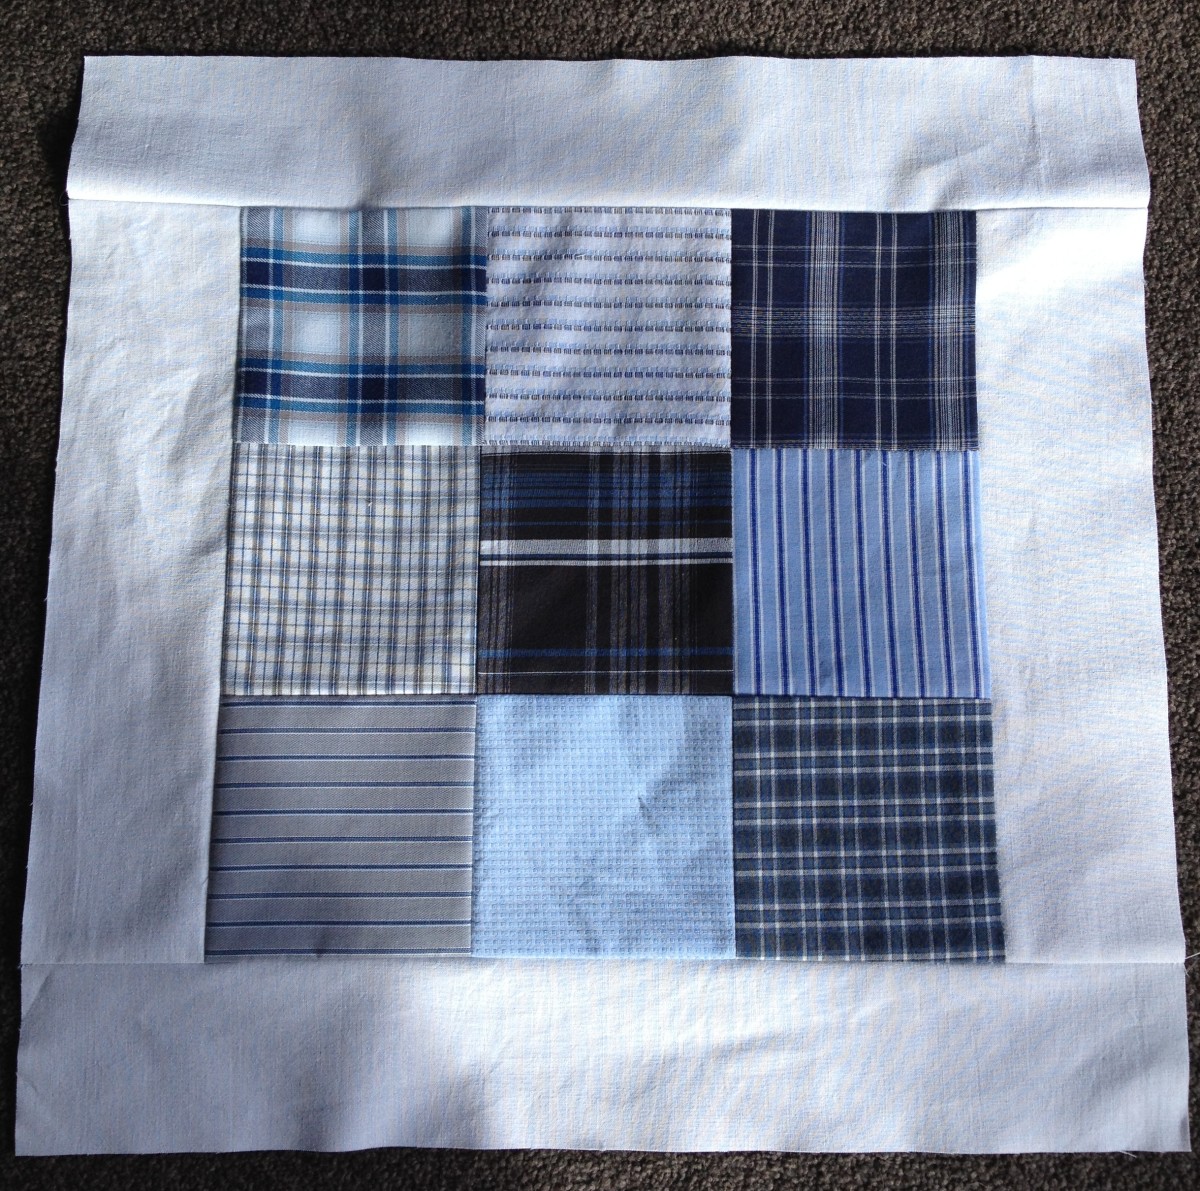 A 9-block square section of an upcycled men's shirt quilt.